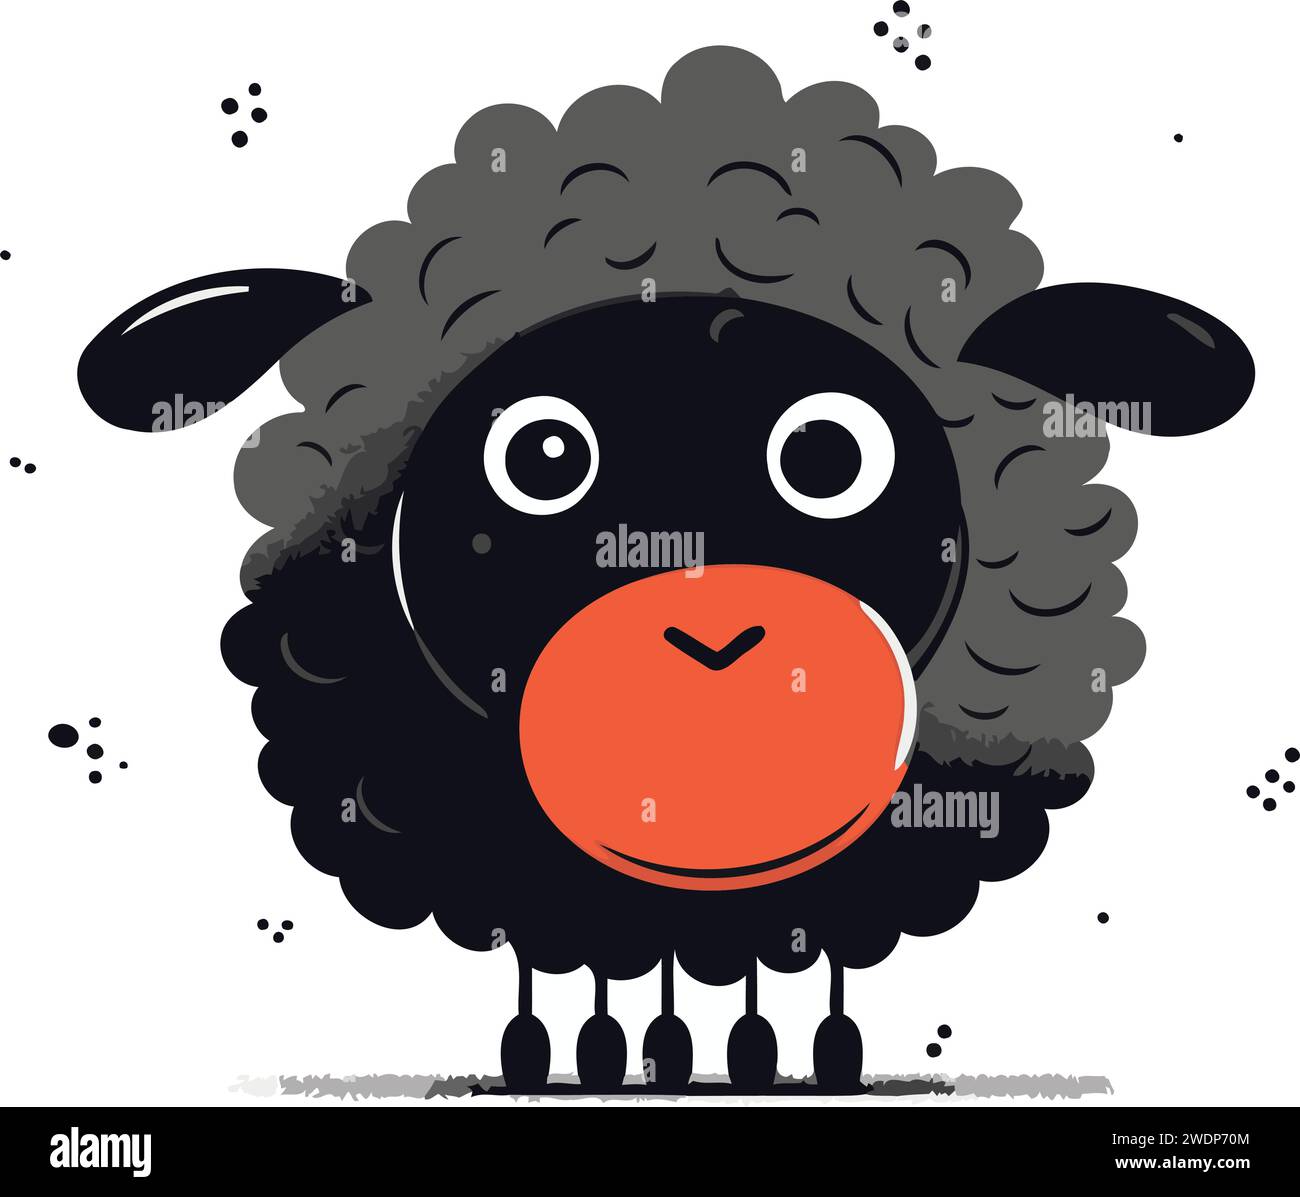 Cute cartoon black sheep on a white background. Vector illustration. Stock Vector